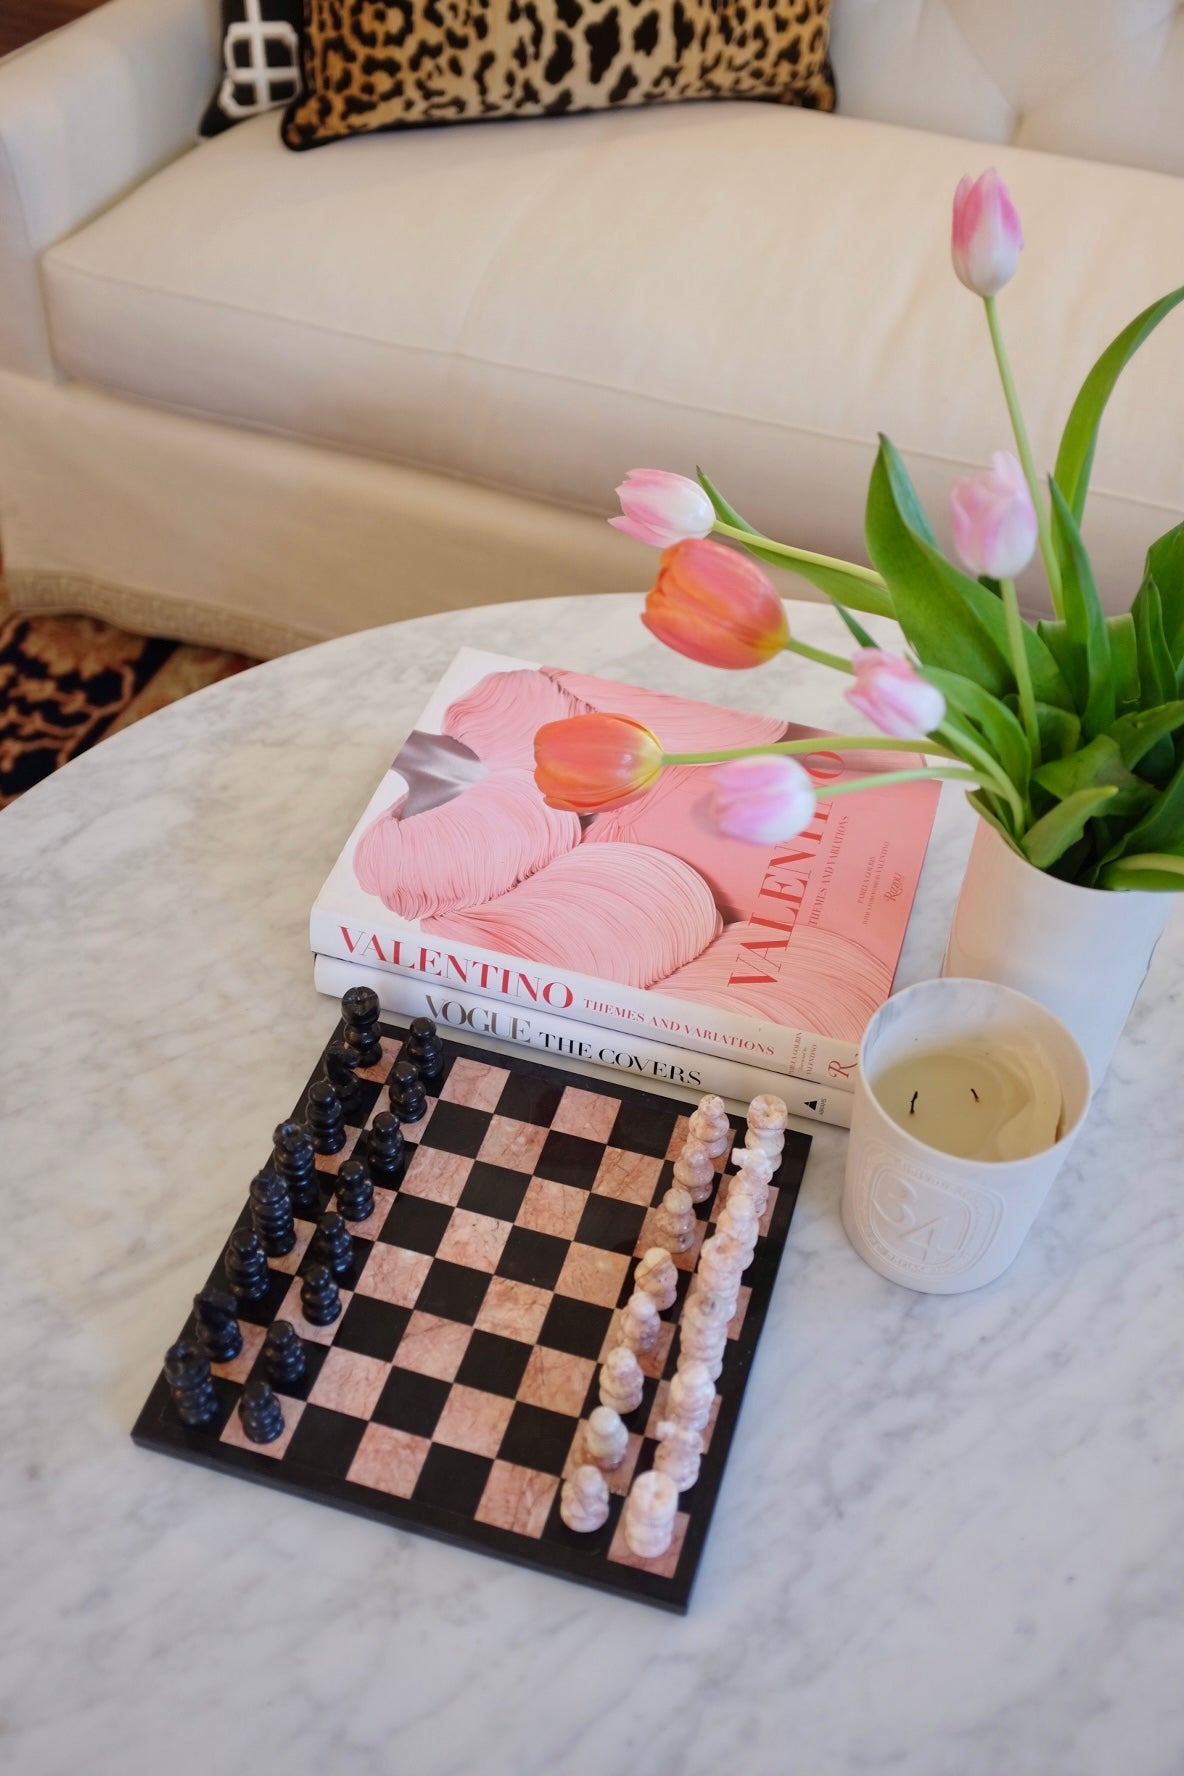 Pink and black marble chess board